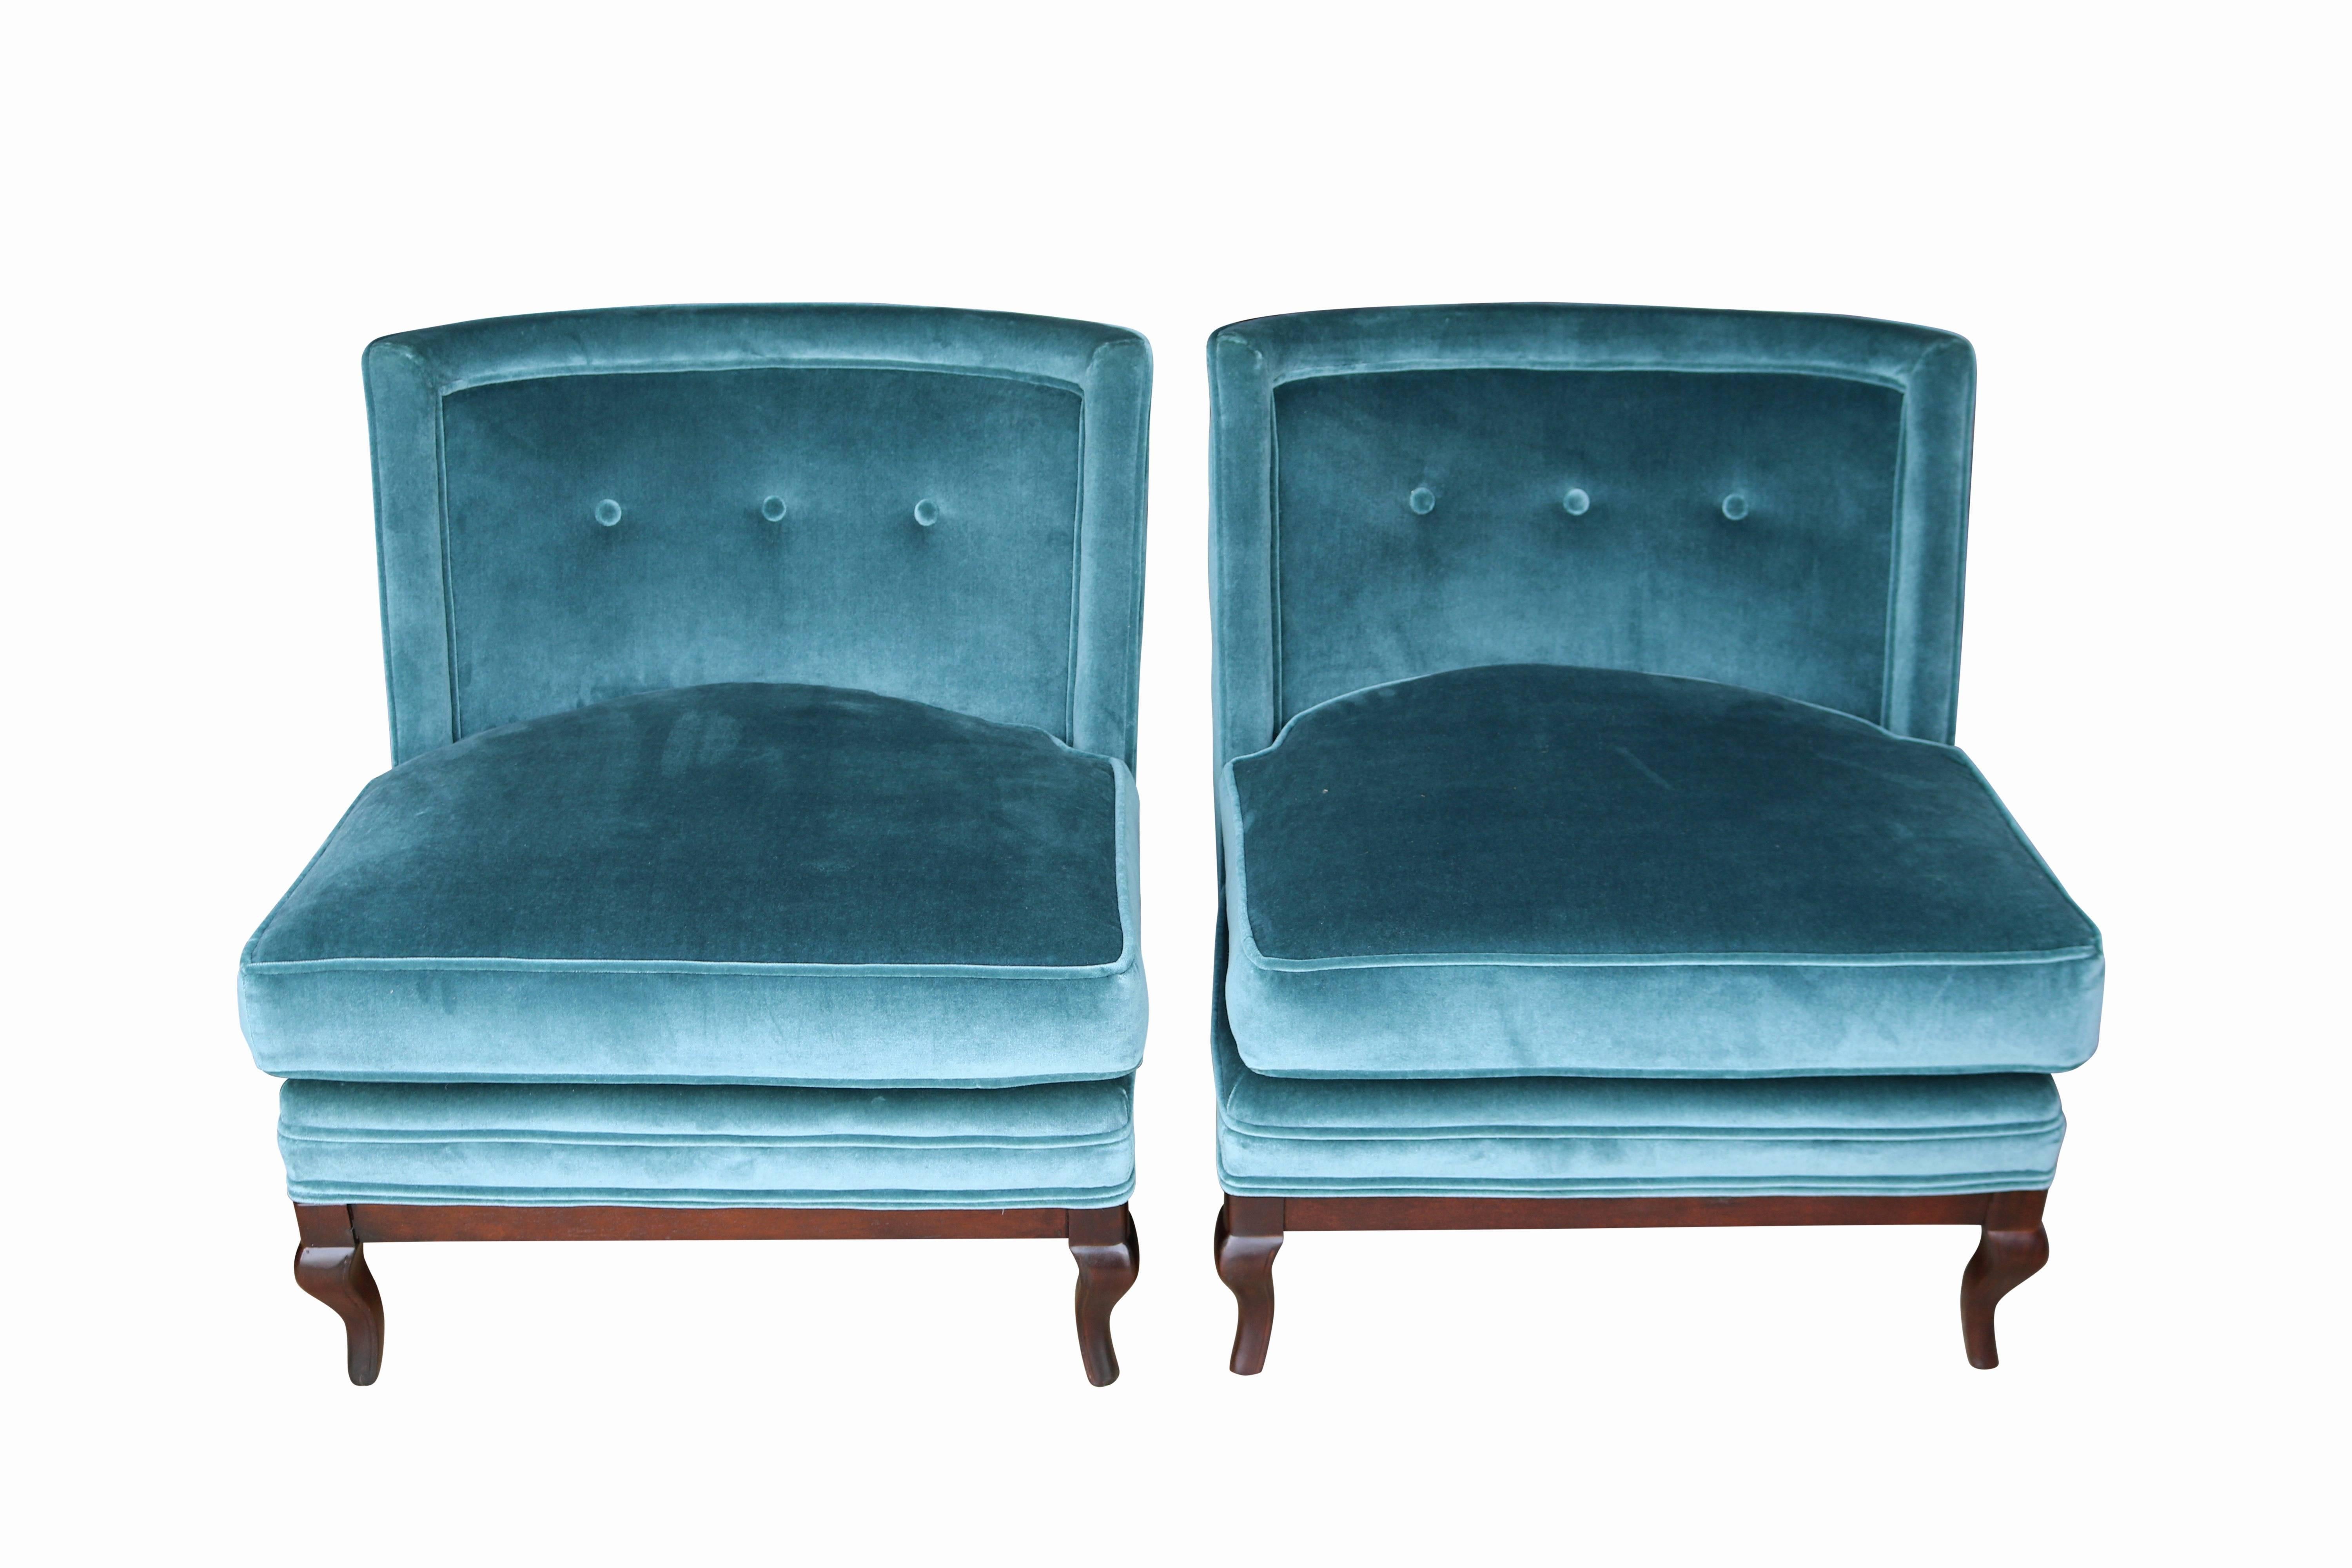 This sophisticated pair of slipper chairs has been lovingly restored. Upholstered in a lush blue velvet with mohair appeal, these chairs are comfortable and luxurious to the touch. Curved walnut legs nod to a more traditional style, making these